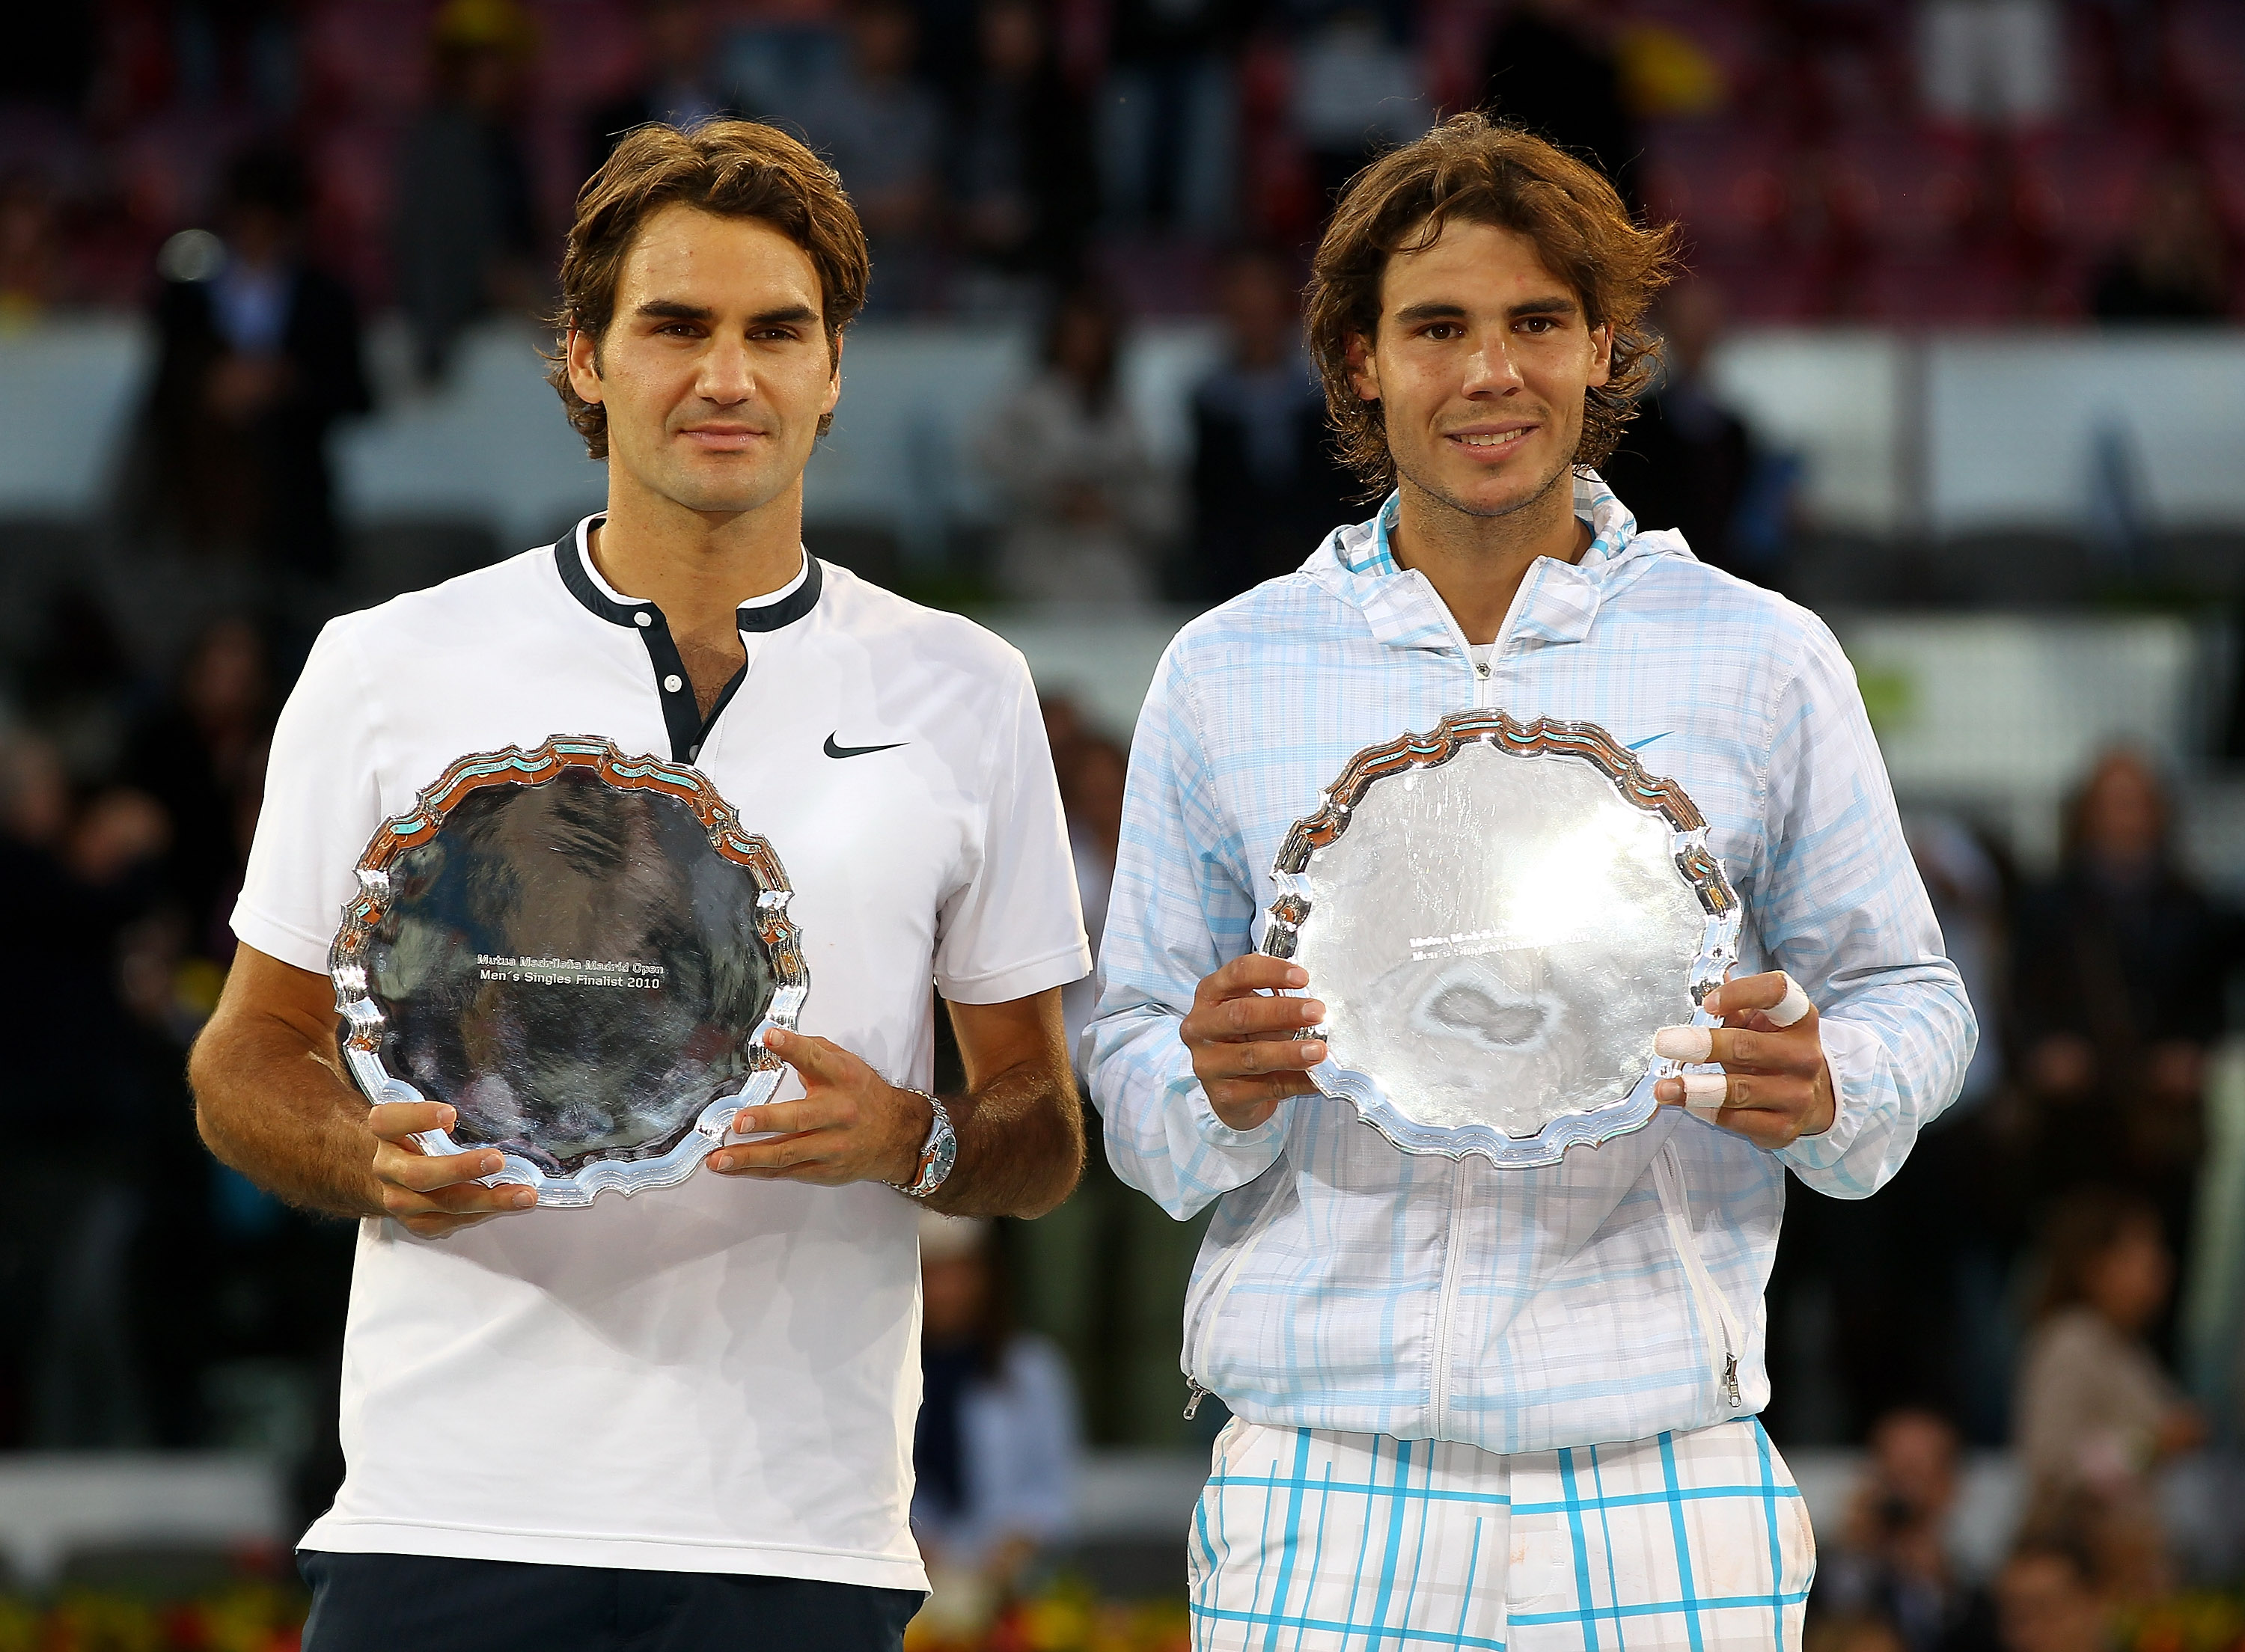 MADRID, SPAIN - MAY 16:  Mens finalist Rafael Nadal and  Roger Federer of Switzerland hold aloft their trophies after the mens final match during the Mutua Madrilena Madrid Open tennis tournament at the Caja Magica on May 16, 2010 in Madrid, Spain.  (Phot